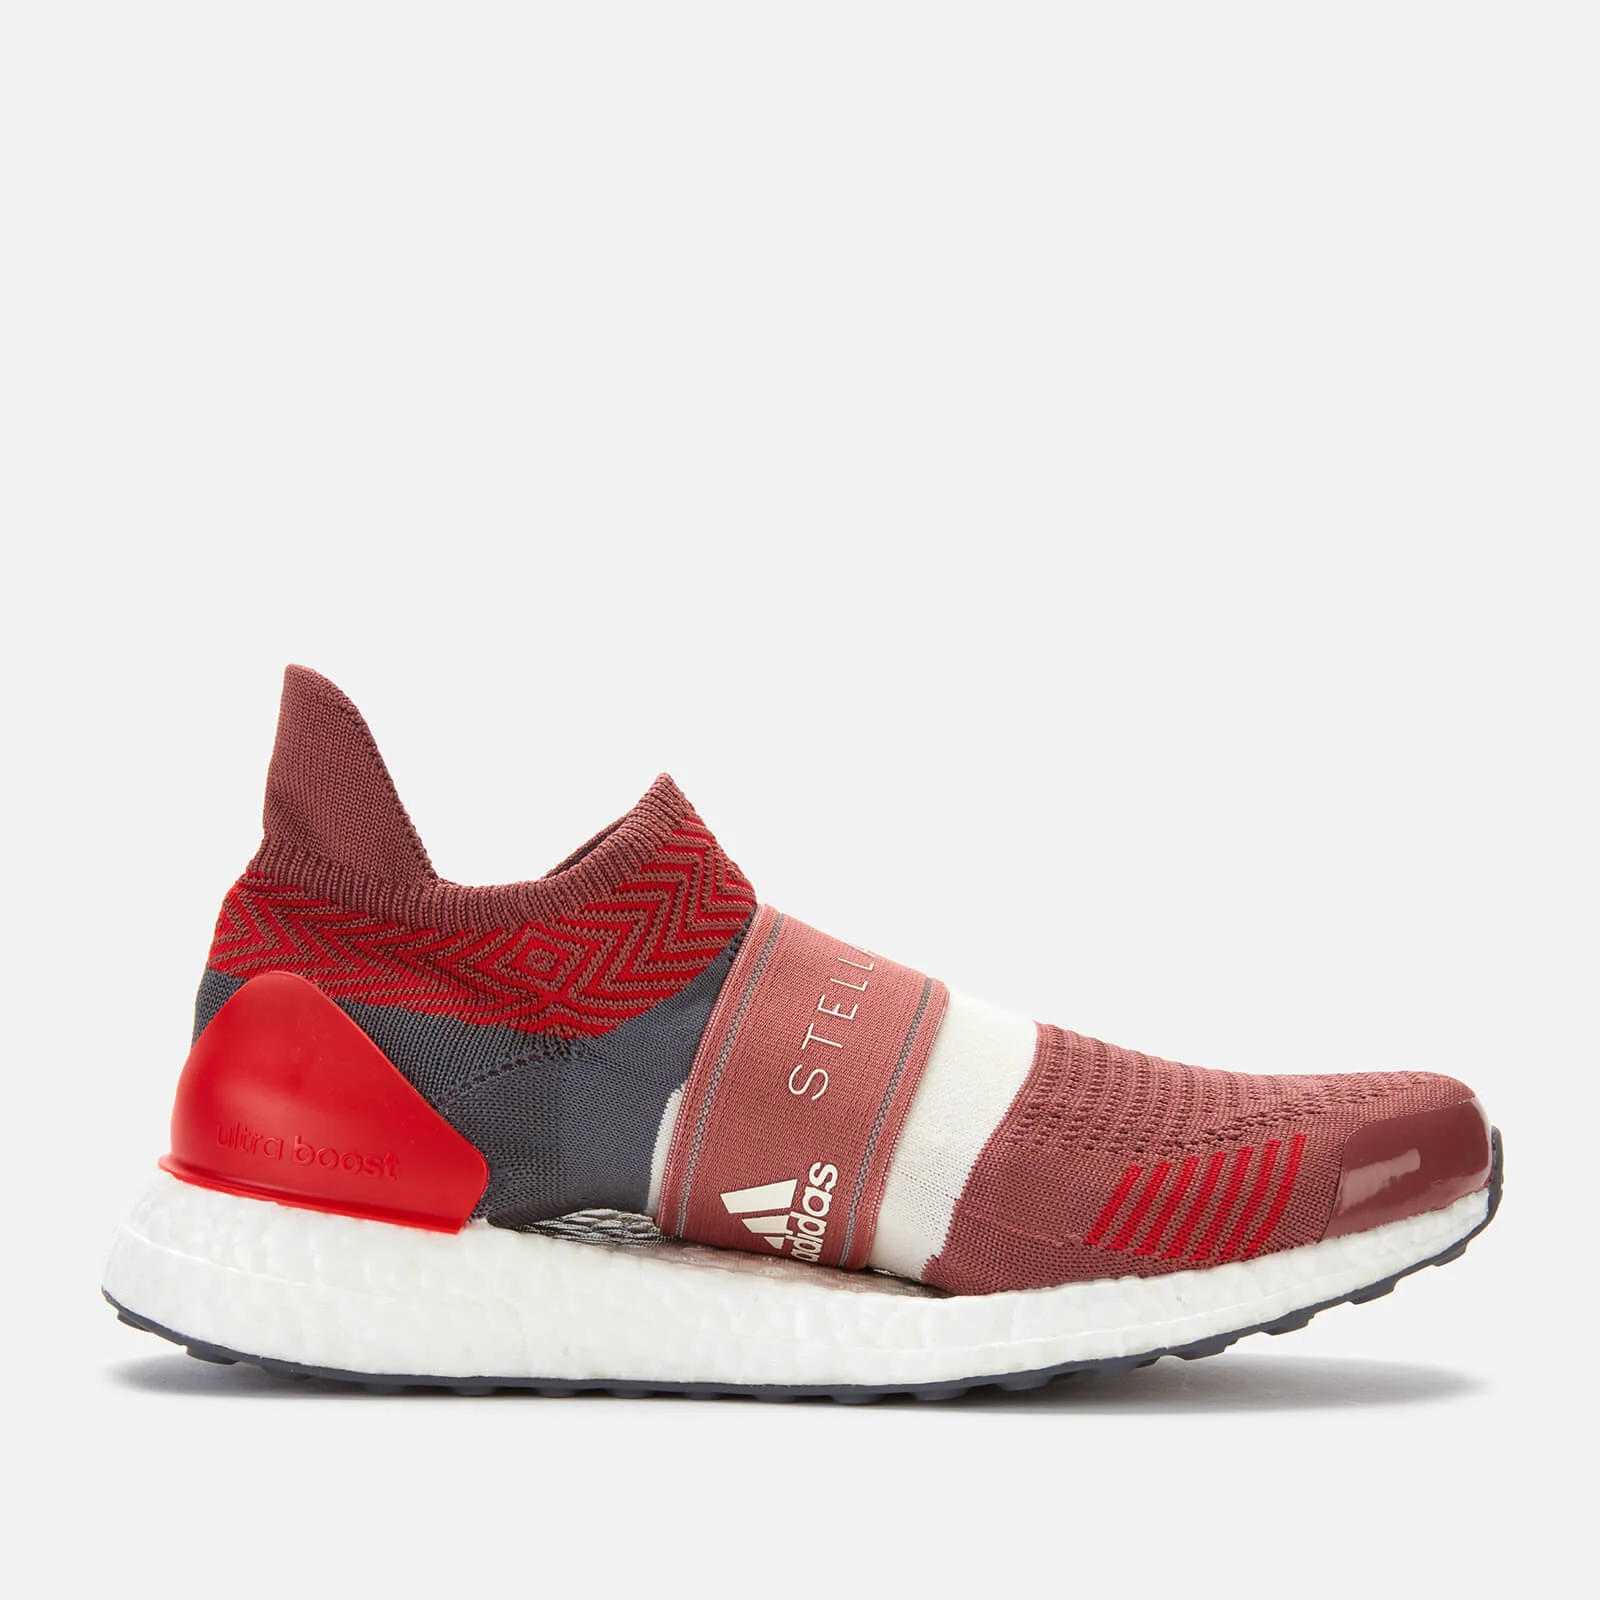 adidas by Stella McCartney Women's Ultraboost X 3.D S Trainers - Clay Red Image 1